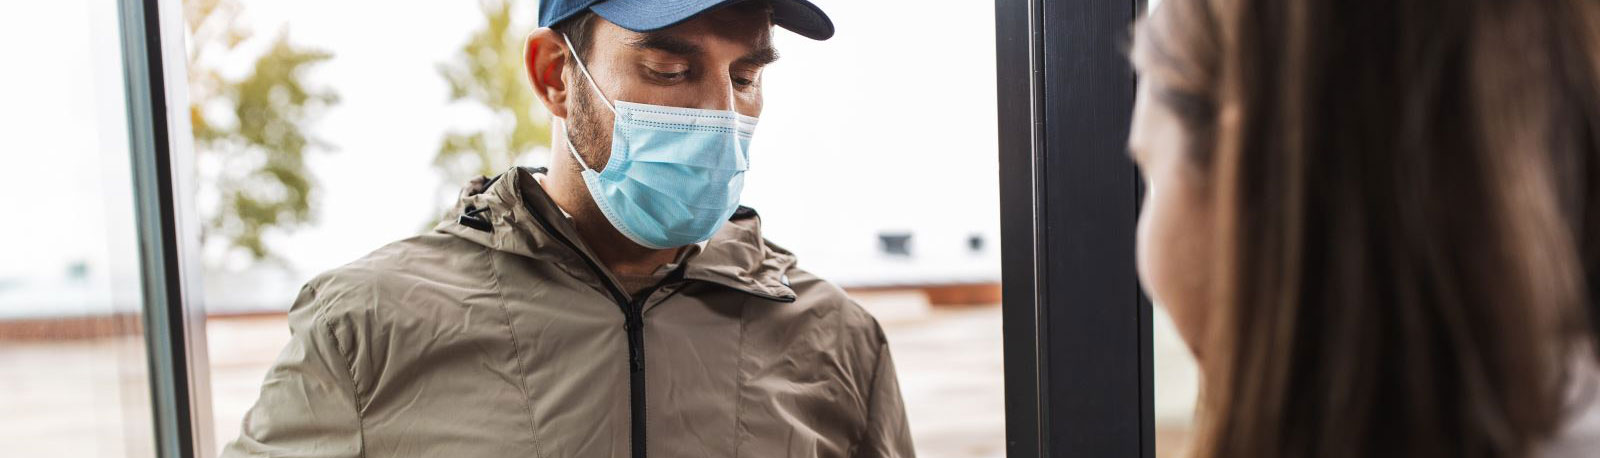 A delivery man wearing a surgical mask talking to a woman in the foreground